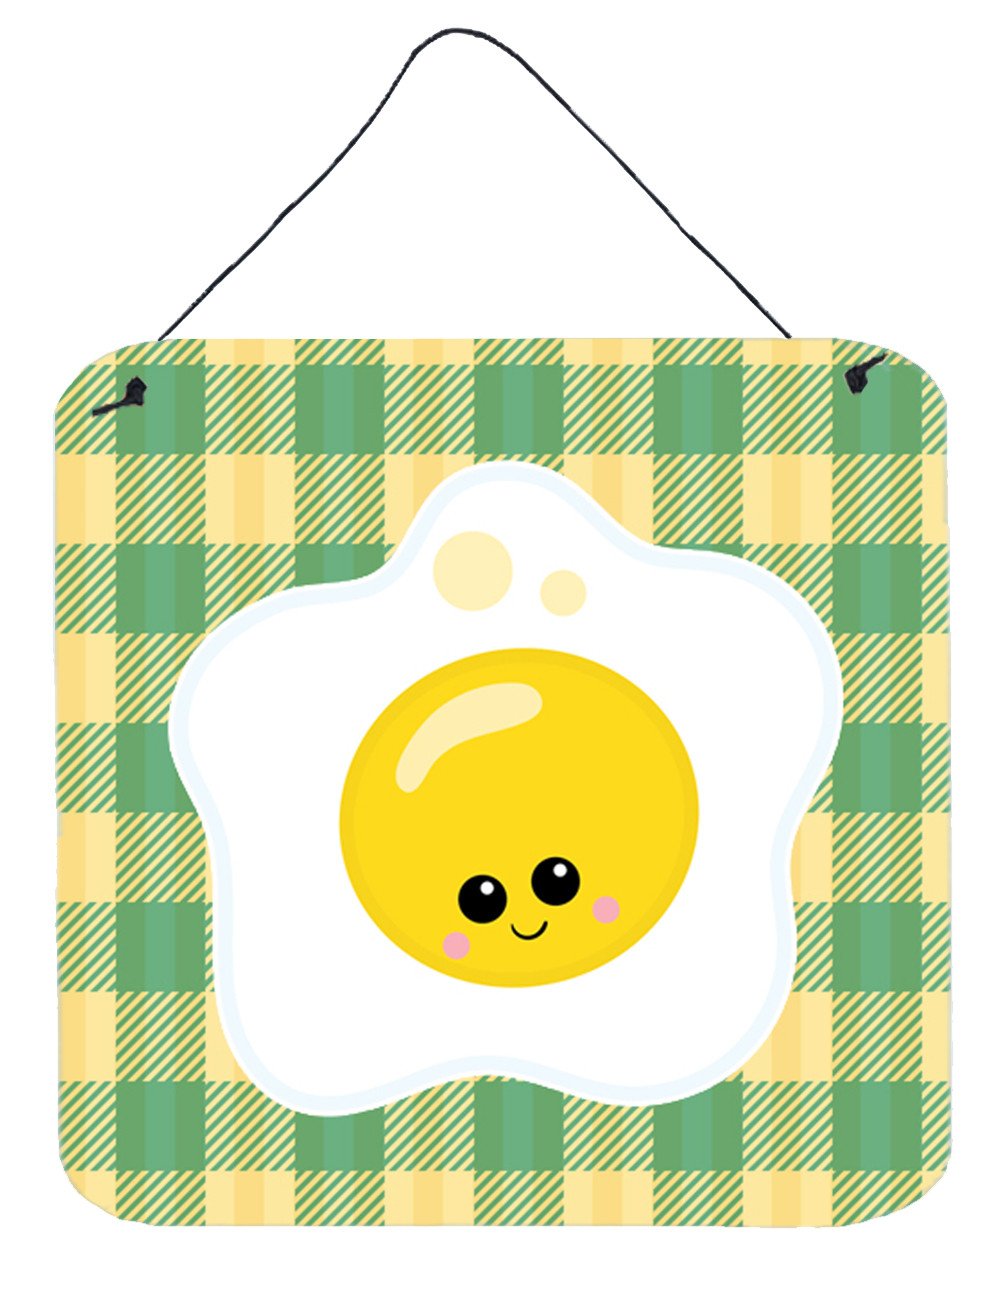 Fried Egg Face Wall or Door Hanging Prints BB7044DS66 by Caroline's Treasures